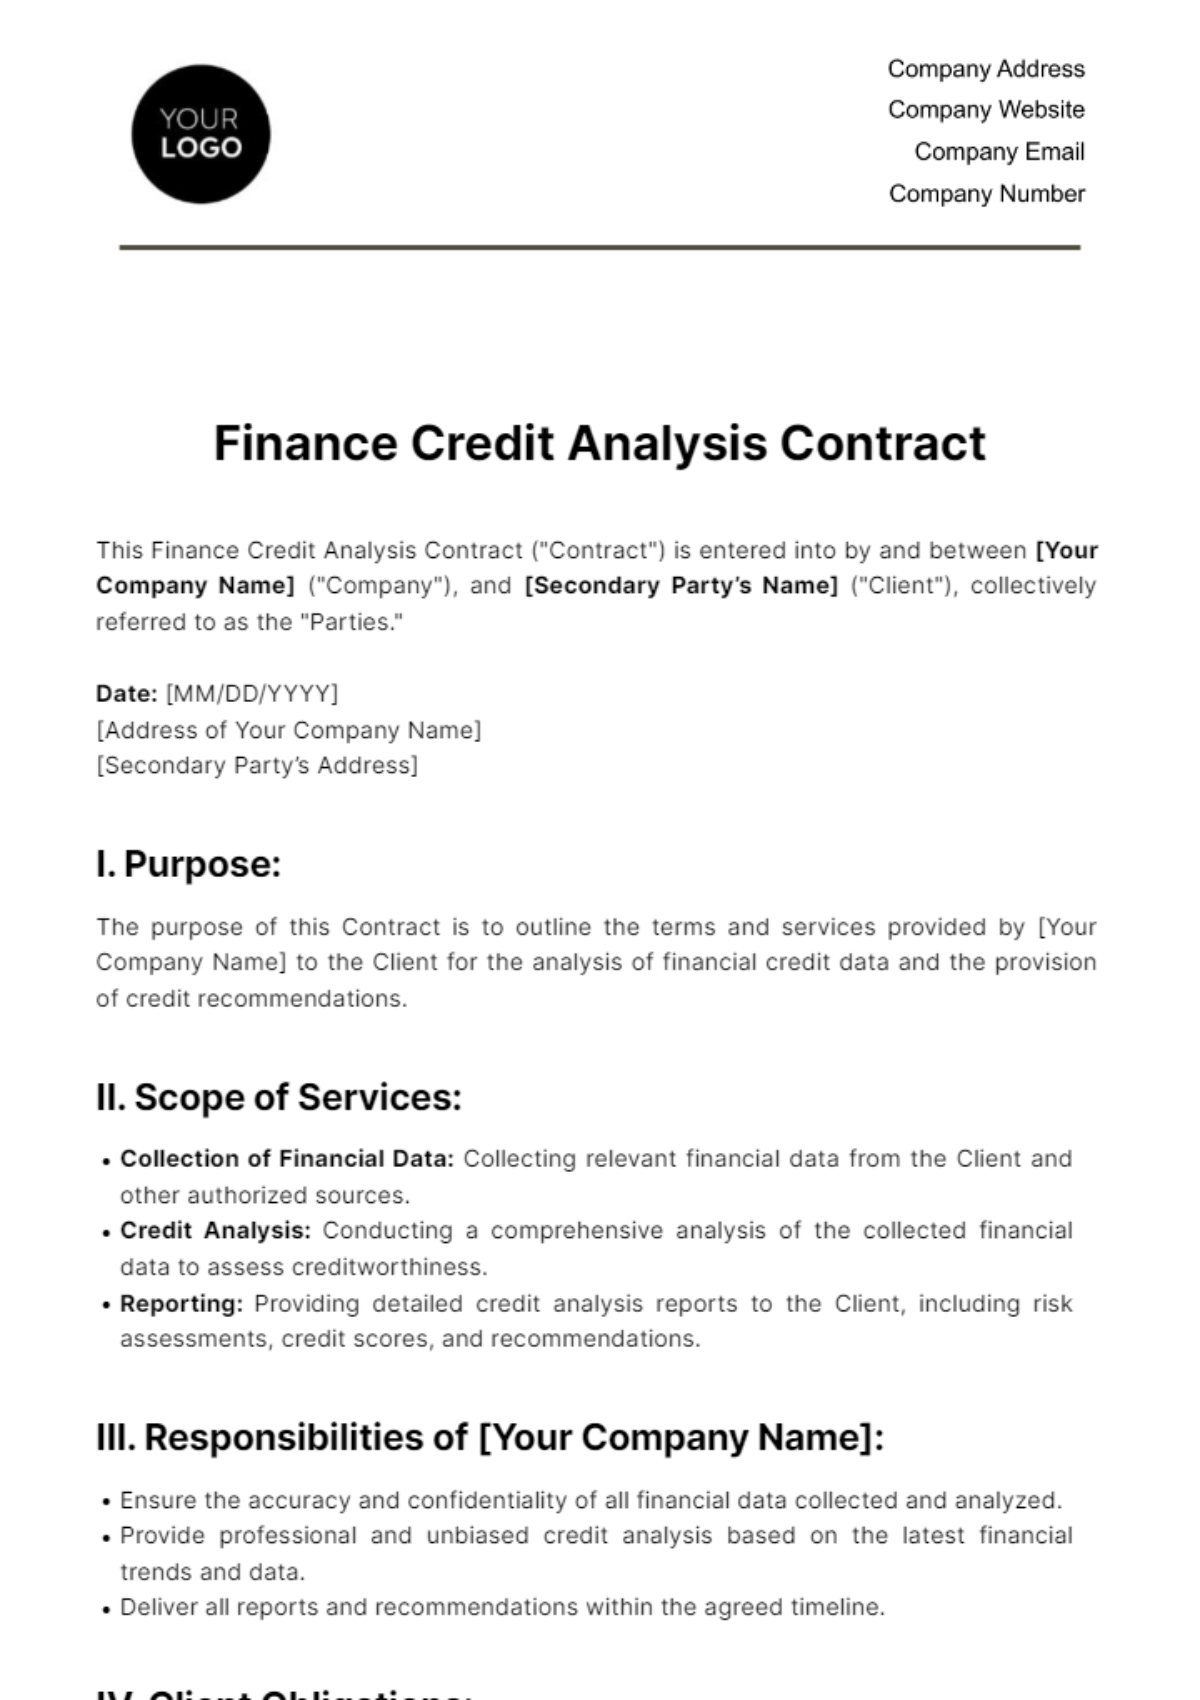 Free Finance Credit Analysis Contract Template